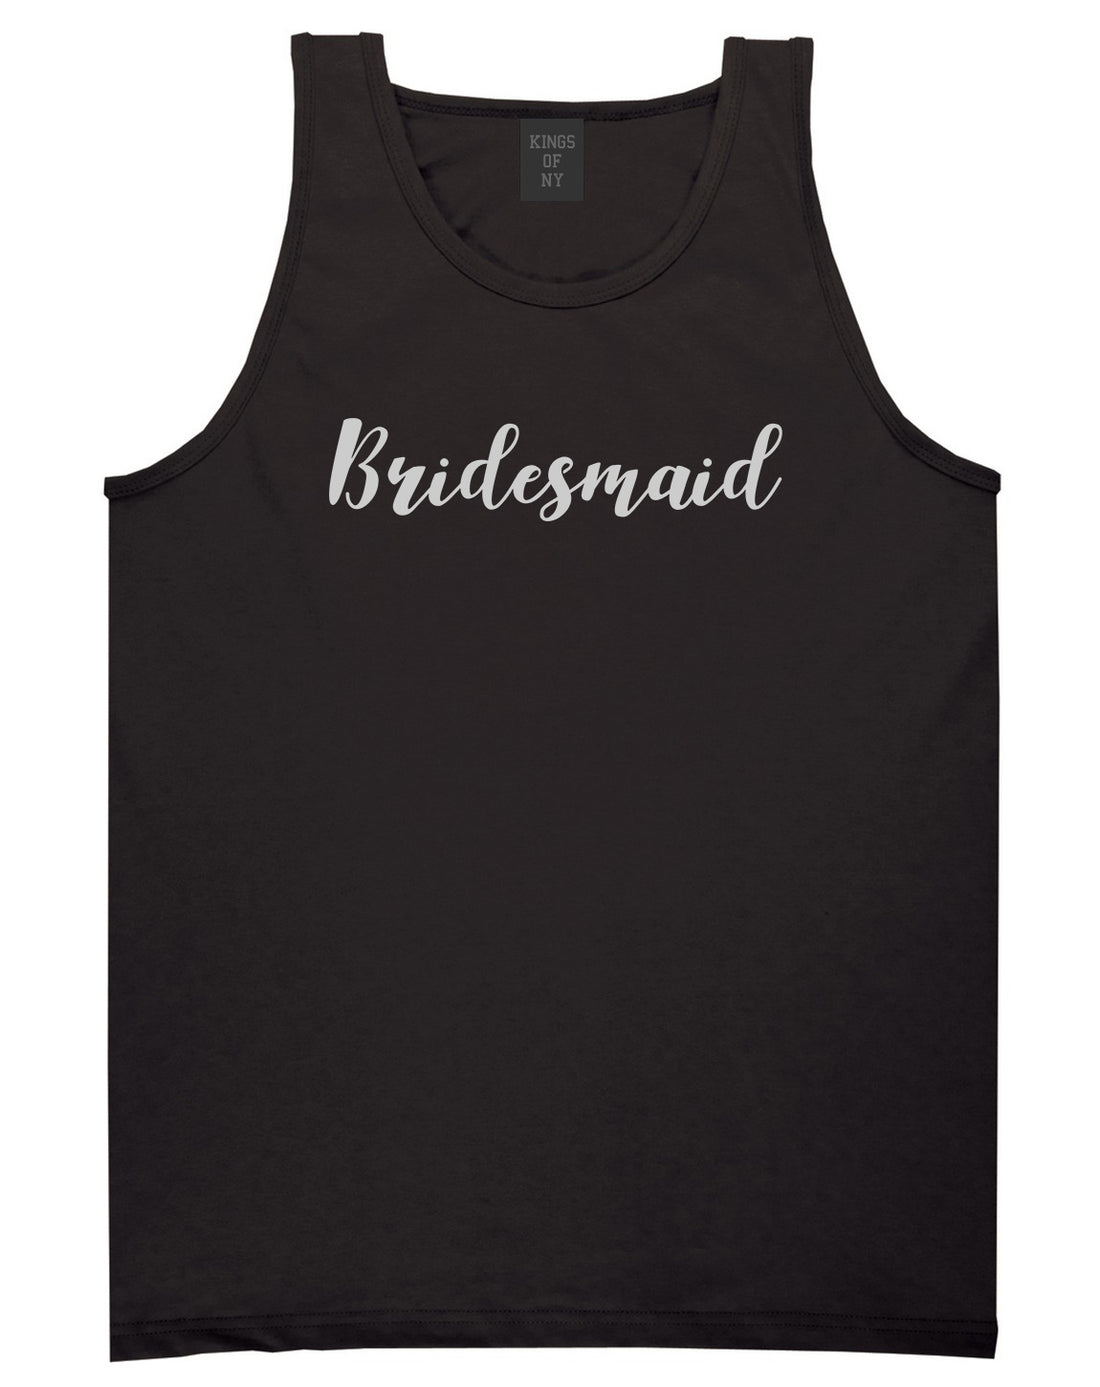 Bridesmaid Bachlorette Party Black Tank Top Shirt by Kings Of NY